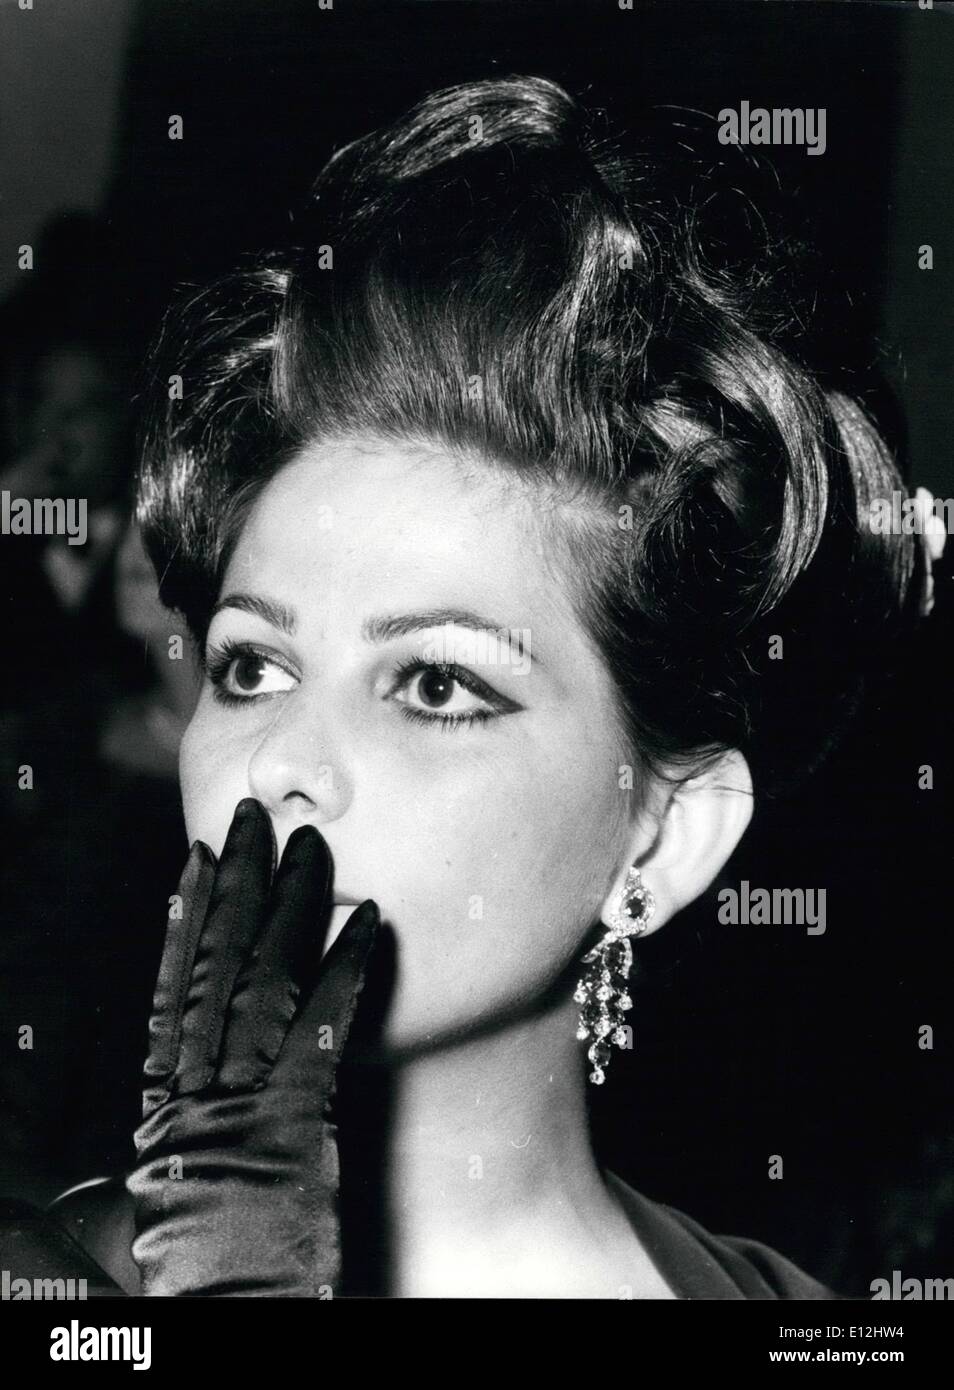 Feb. 24, 2012 - Tonight in a roman cinema, took place the ceremony of delivery of ''Silver ribbons'' prize to beat actor director and producers for 1962; after the ceremony, was presented in ''wordly performance'' the Visconti's film ''Il Gattopardo''. Photo shows Claudia Cardinale, who is ''Angelica in 'Il Gattopardo' Stock Photo